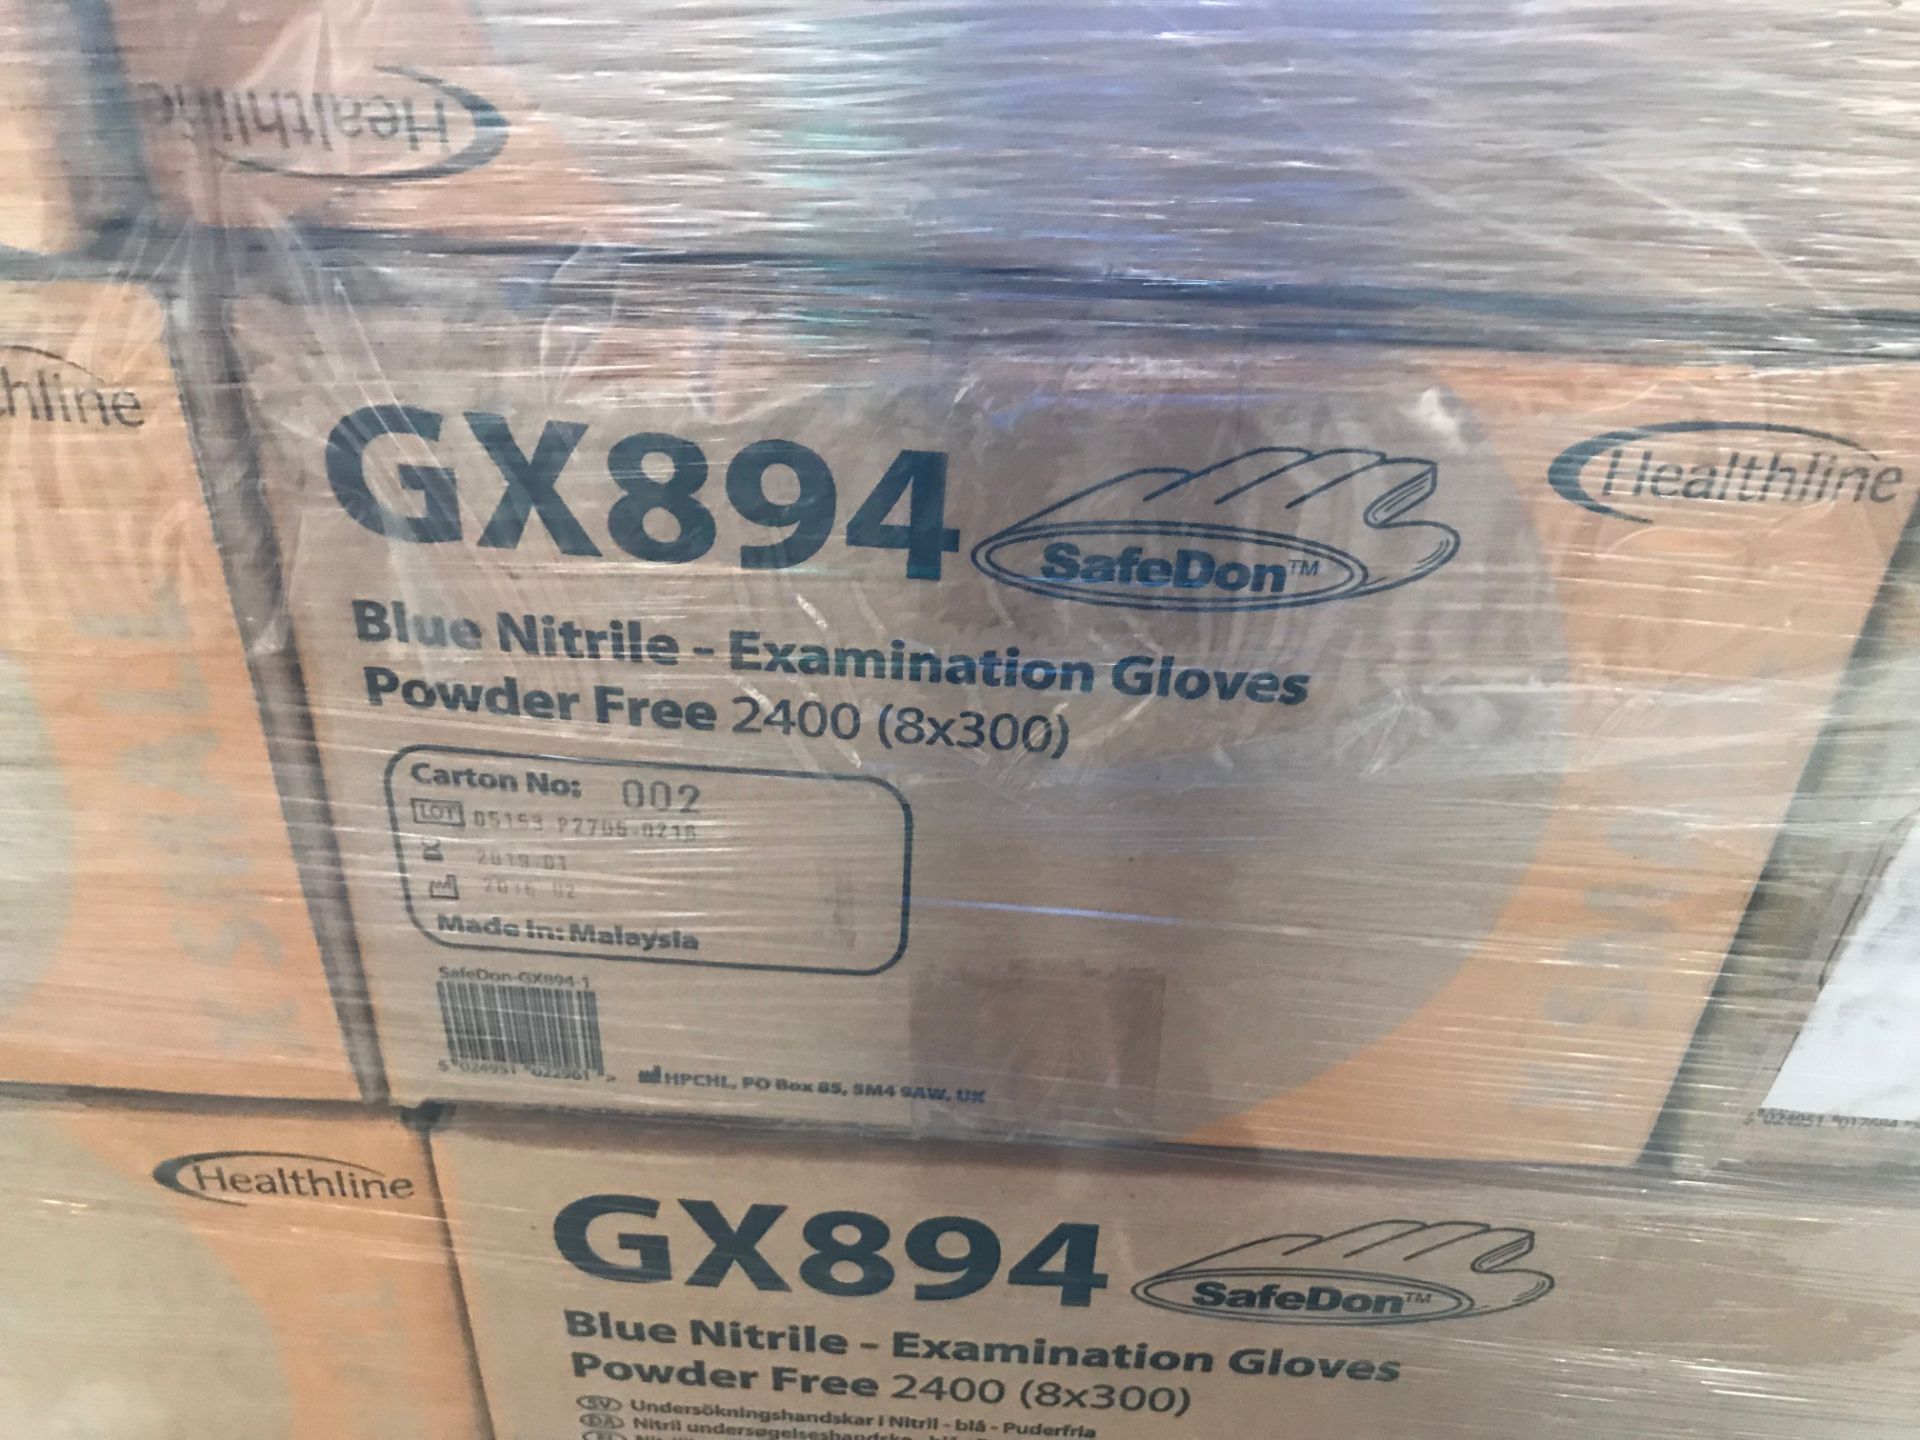 GX894 BLUE NITRILE EXAMINATION GLOVES POWDER FREE X SMALL 48 CASES ON PALLET - Image 2 of 2